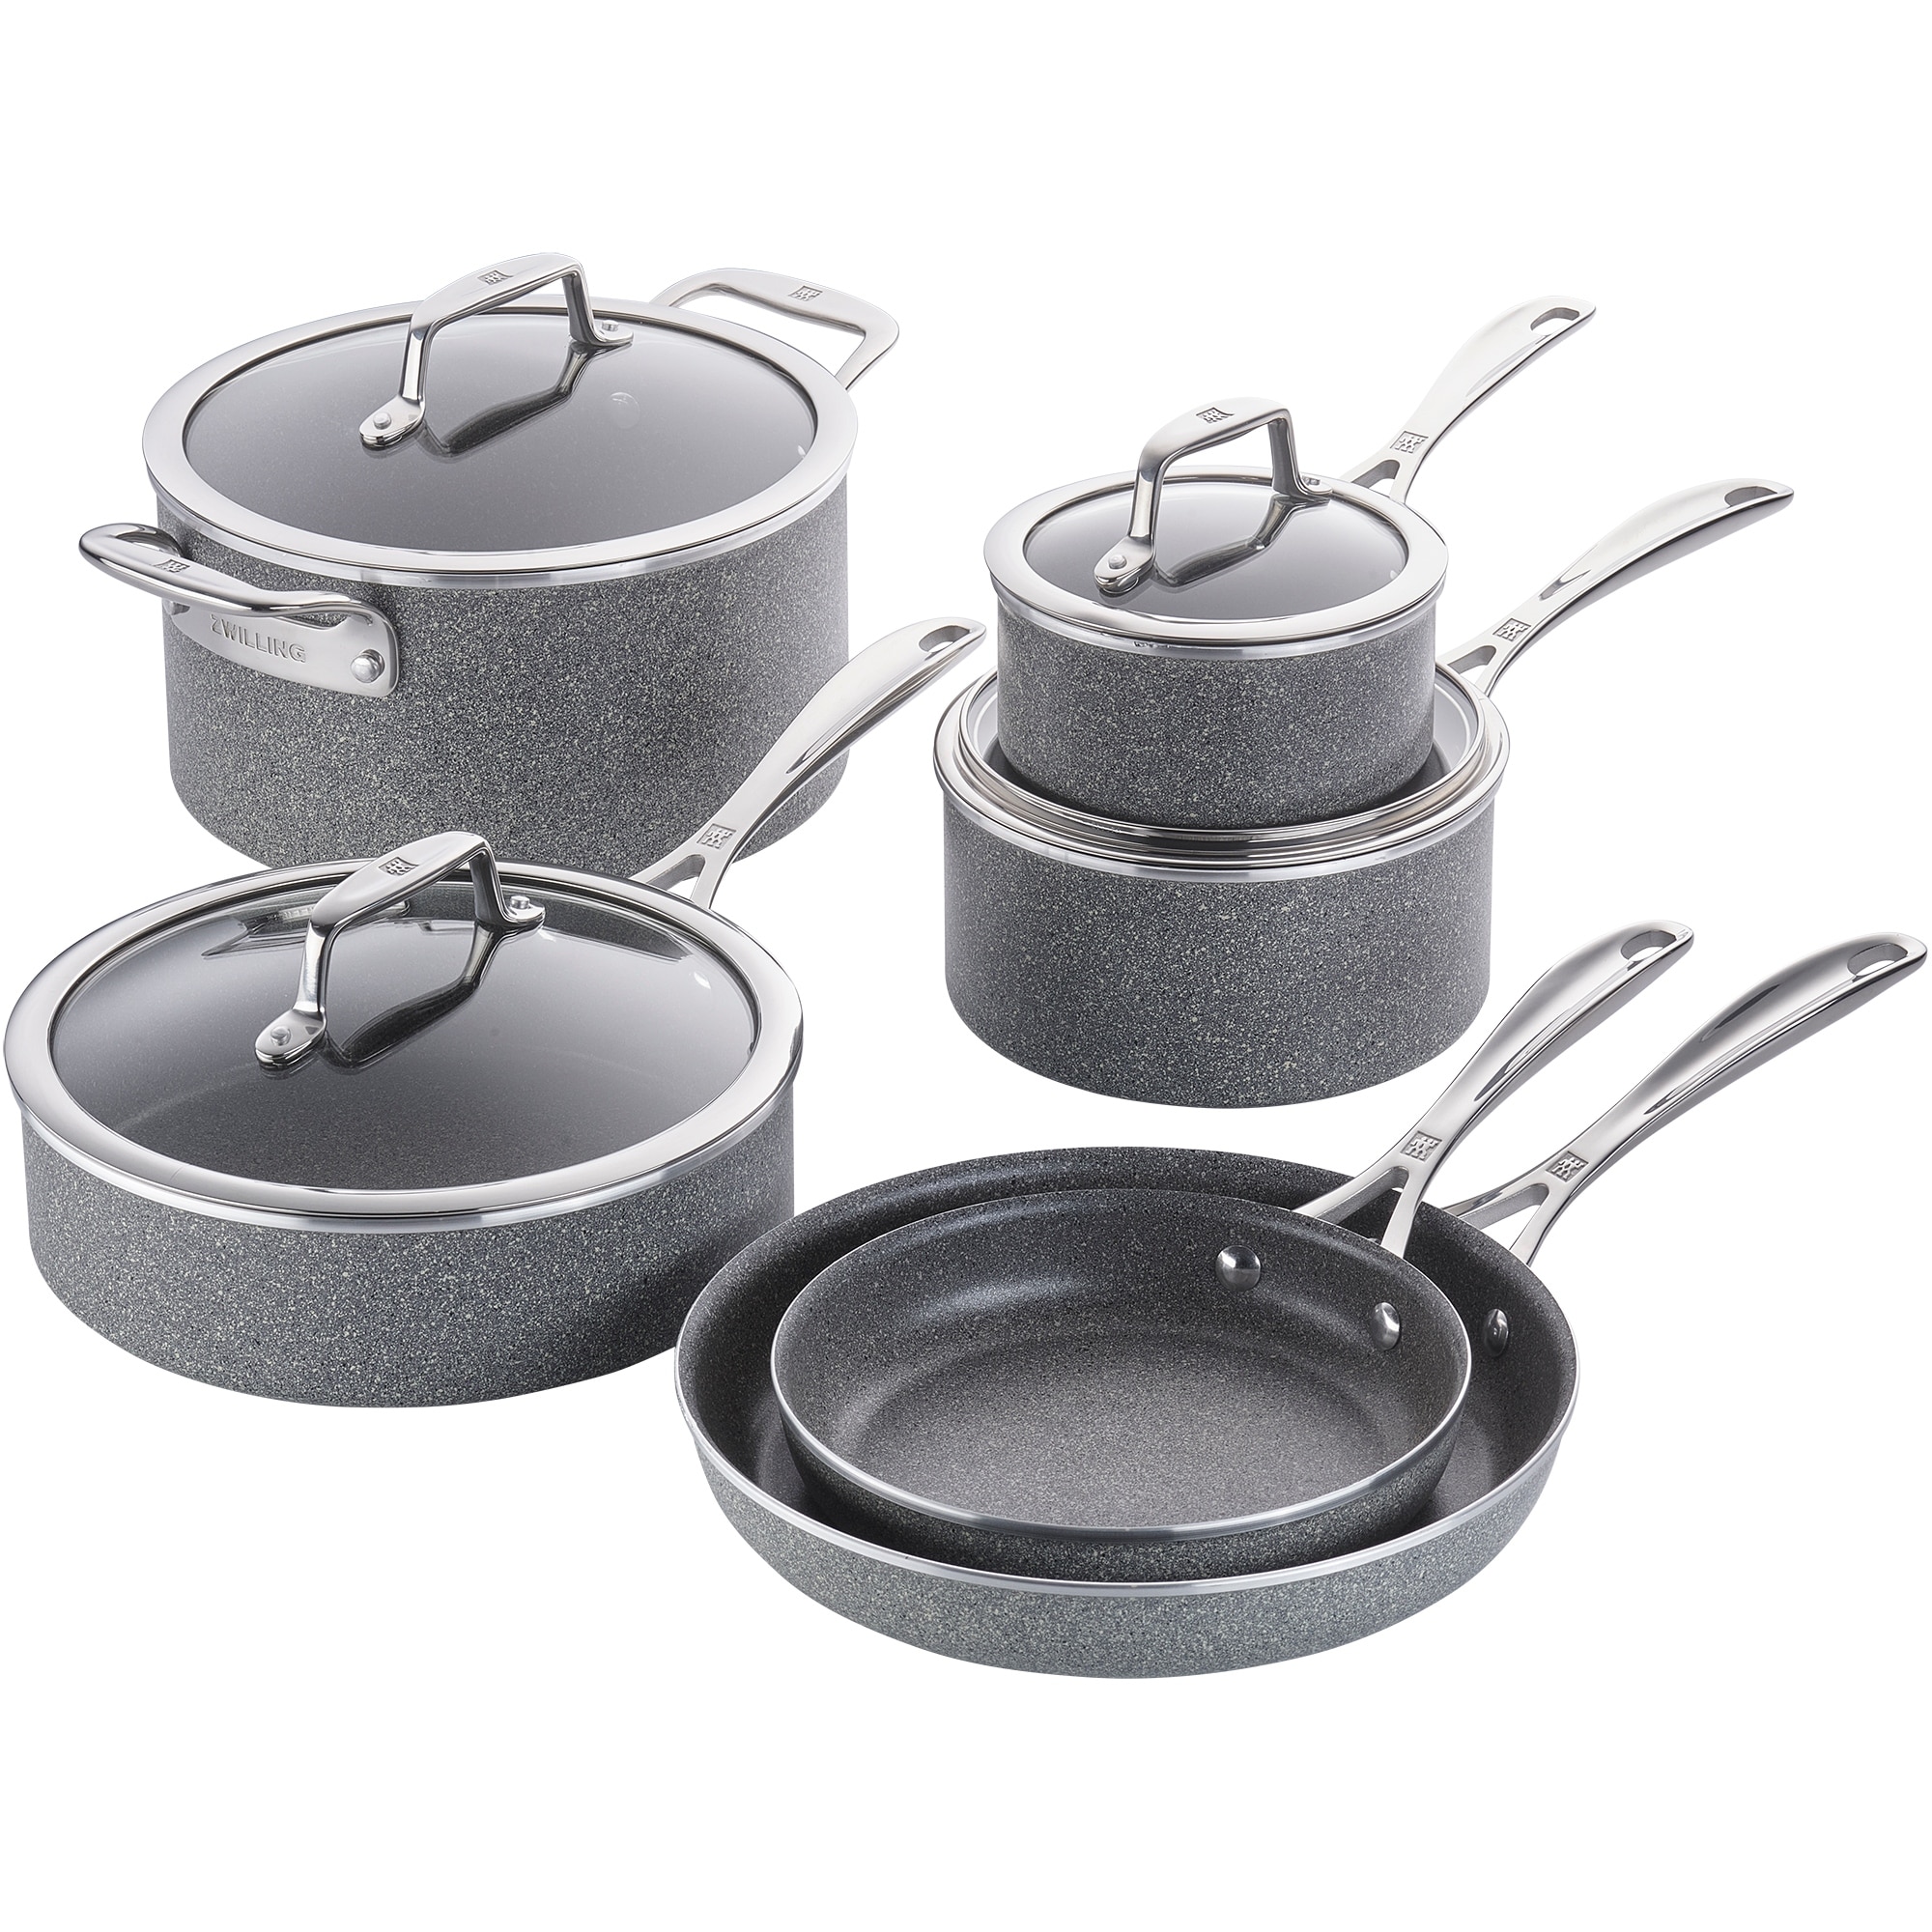 https://ak1.ostkcdn.com/images/products/is/images/direct/722cd664b7dc87bf4f80479e2398835b93258509/ZWILLING-Vitale-10-pc-Aluminum-Nonstick-Cookware-Set.jpg